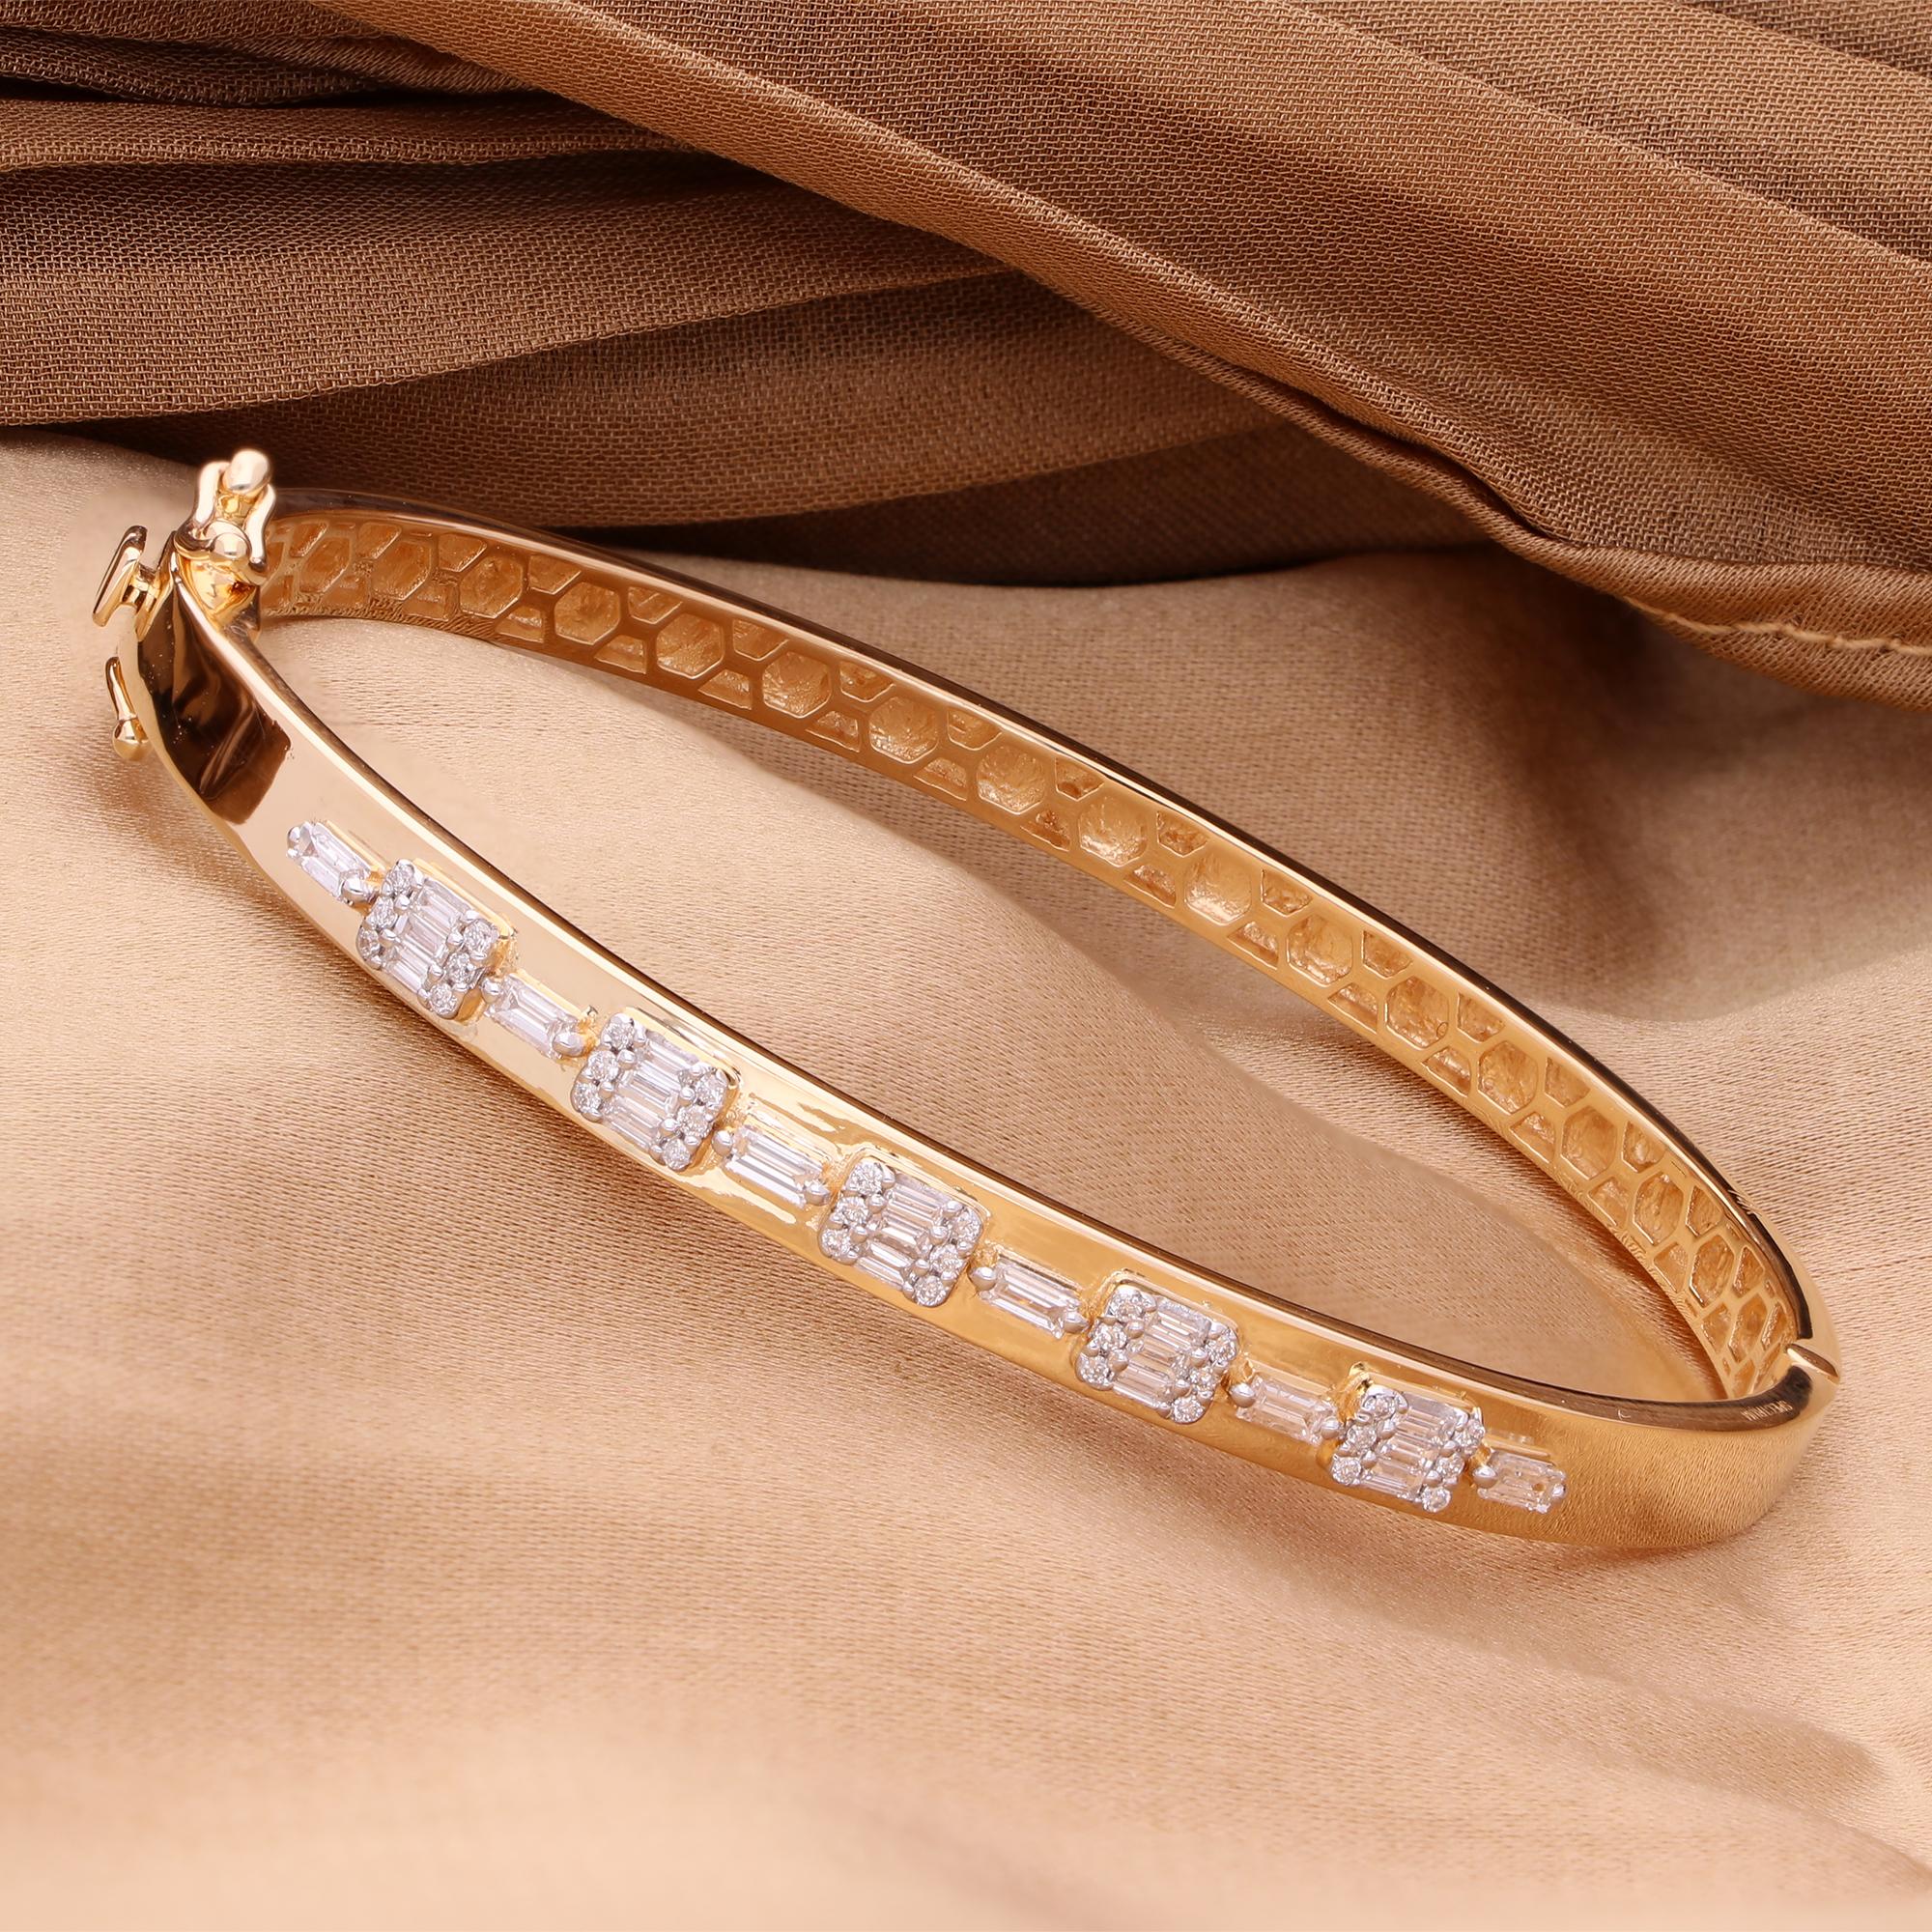 Crafted with care and attention to detail, this Natural 0.53 Carat Baguette Diamond Bangle Bracelet is a true work of art. Whether gifted to a loved one or cherished as a personal treasure, it is sure to become a beloved addition to any jewelry